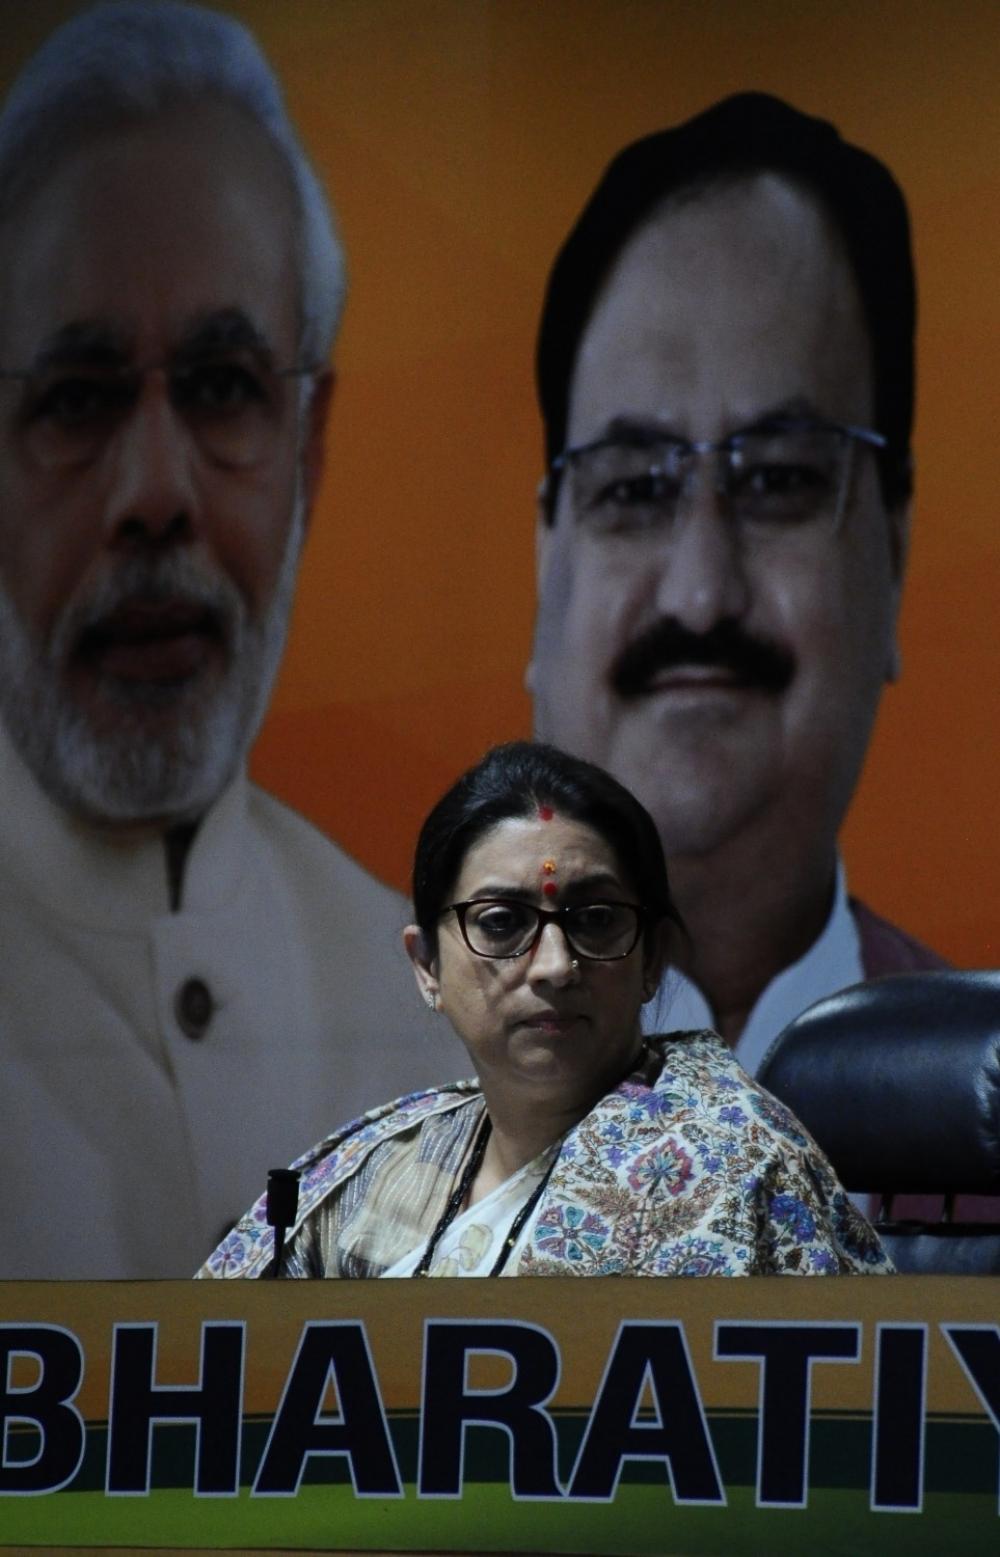 The Weekend Leader - Today, Congress tried to harm the Prime Minister of India: Smriti Irani